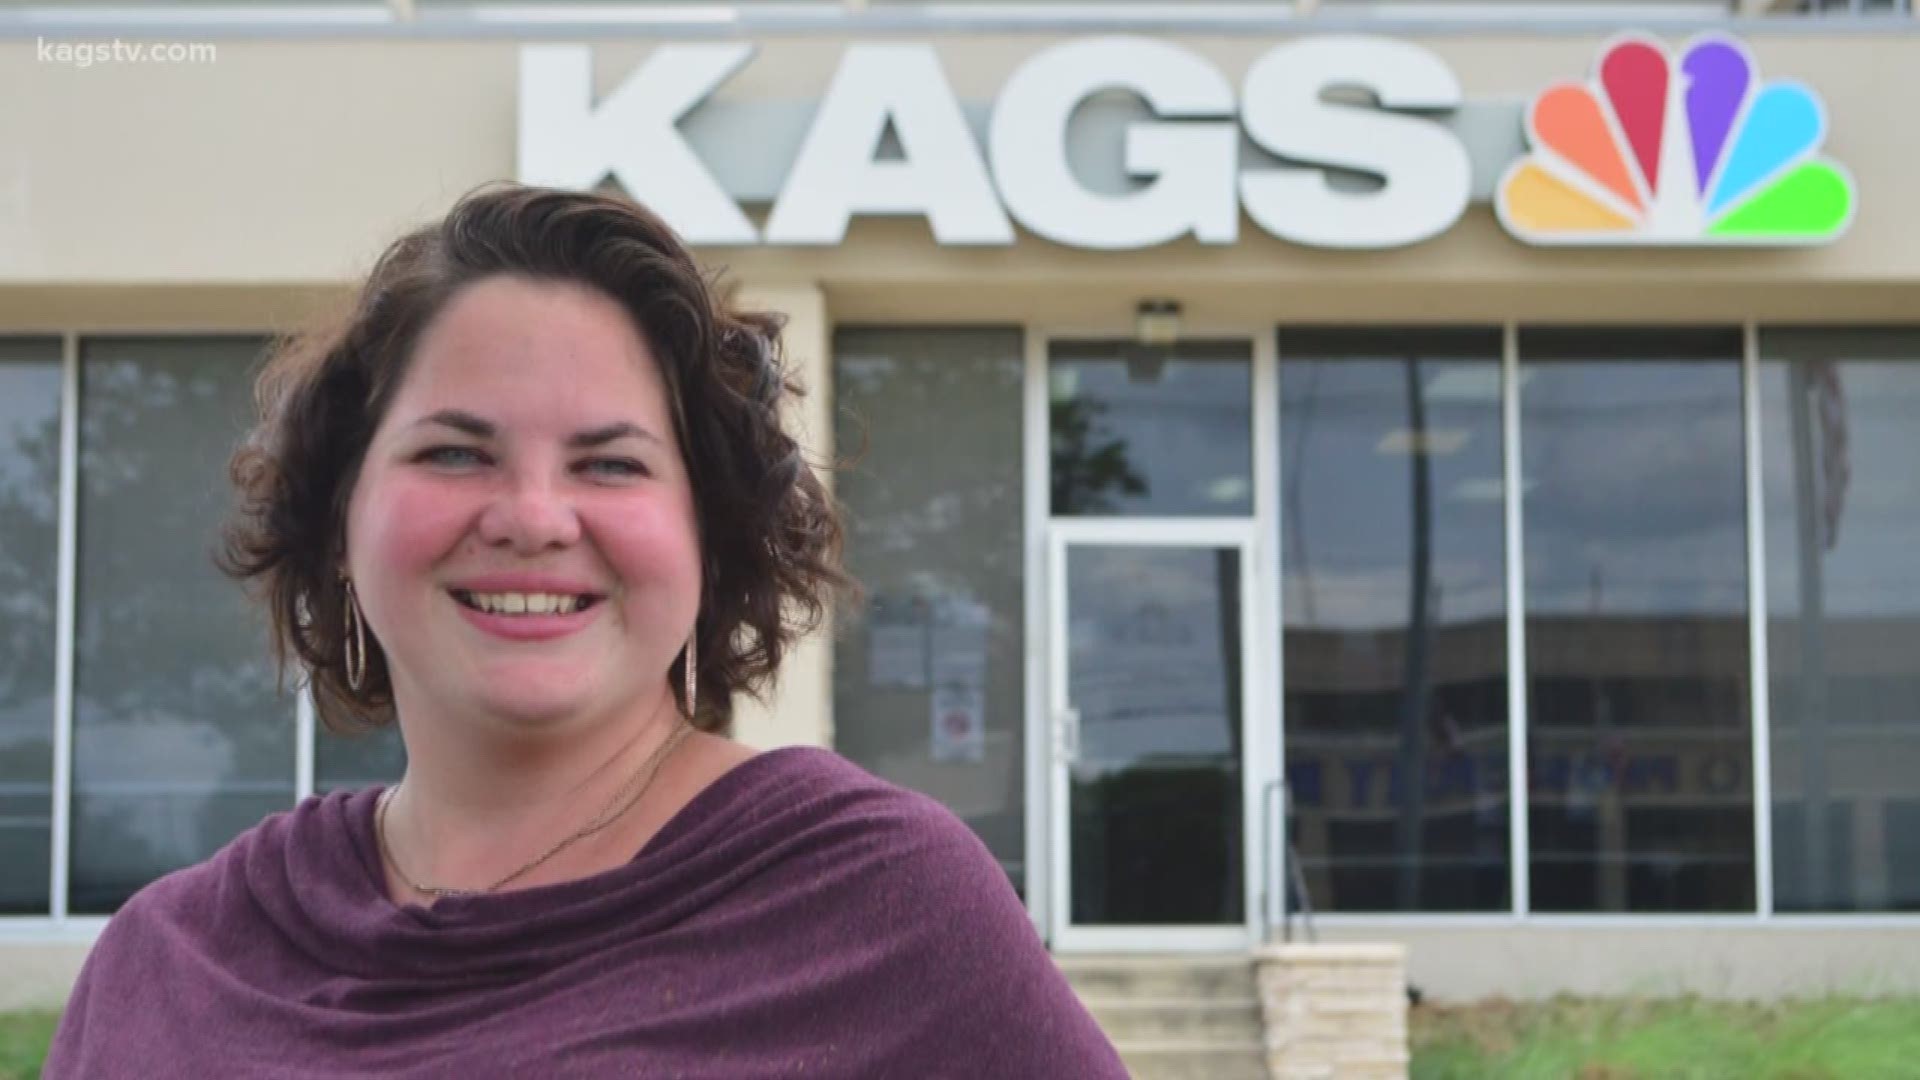 KAGS News would like to announce that veteran news manager Erin Wencl will join the station as News Director, effective June 3rd, 2019.

Erin brings with her 12-plus years of experience in news. She recently served as Executive Producer of Texas Today, the morning news program on KCEN in Temple, TX.